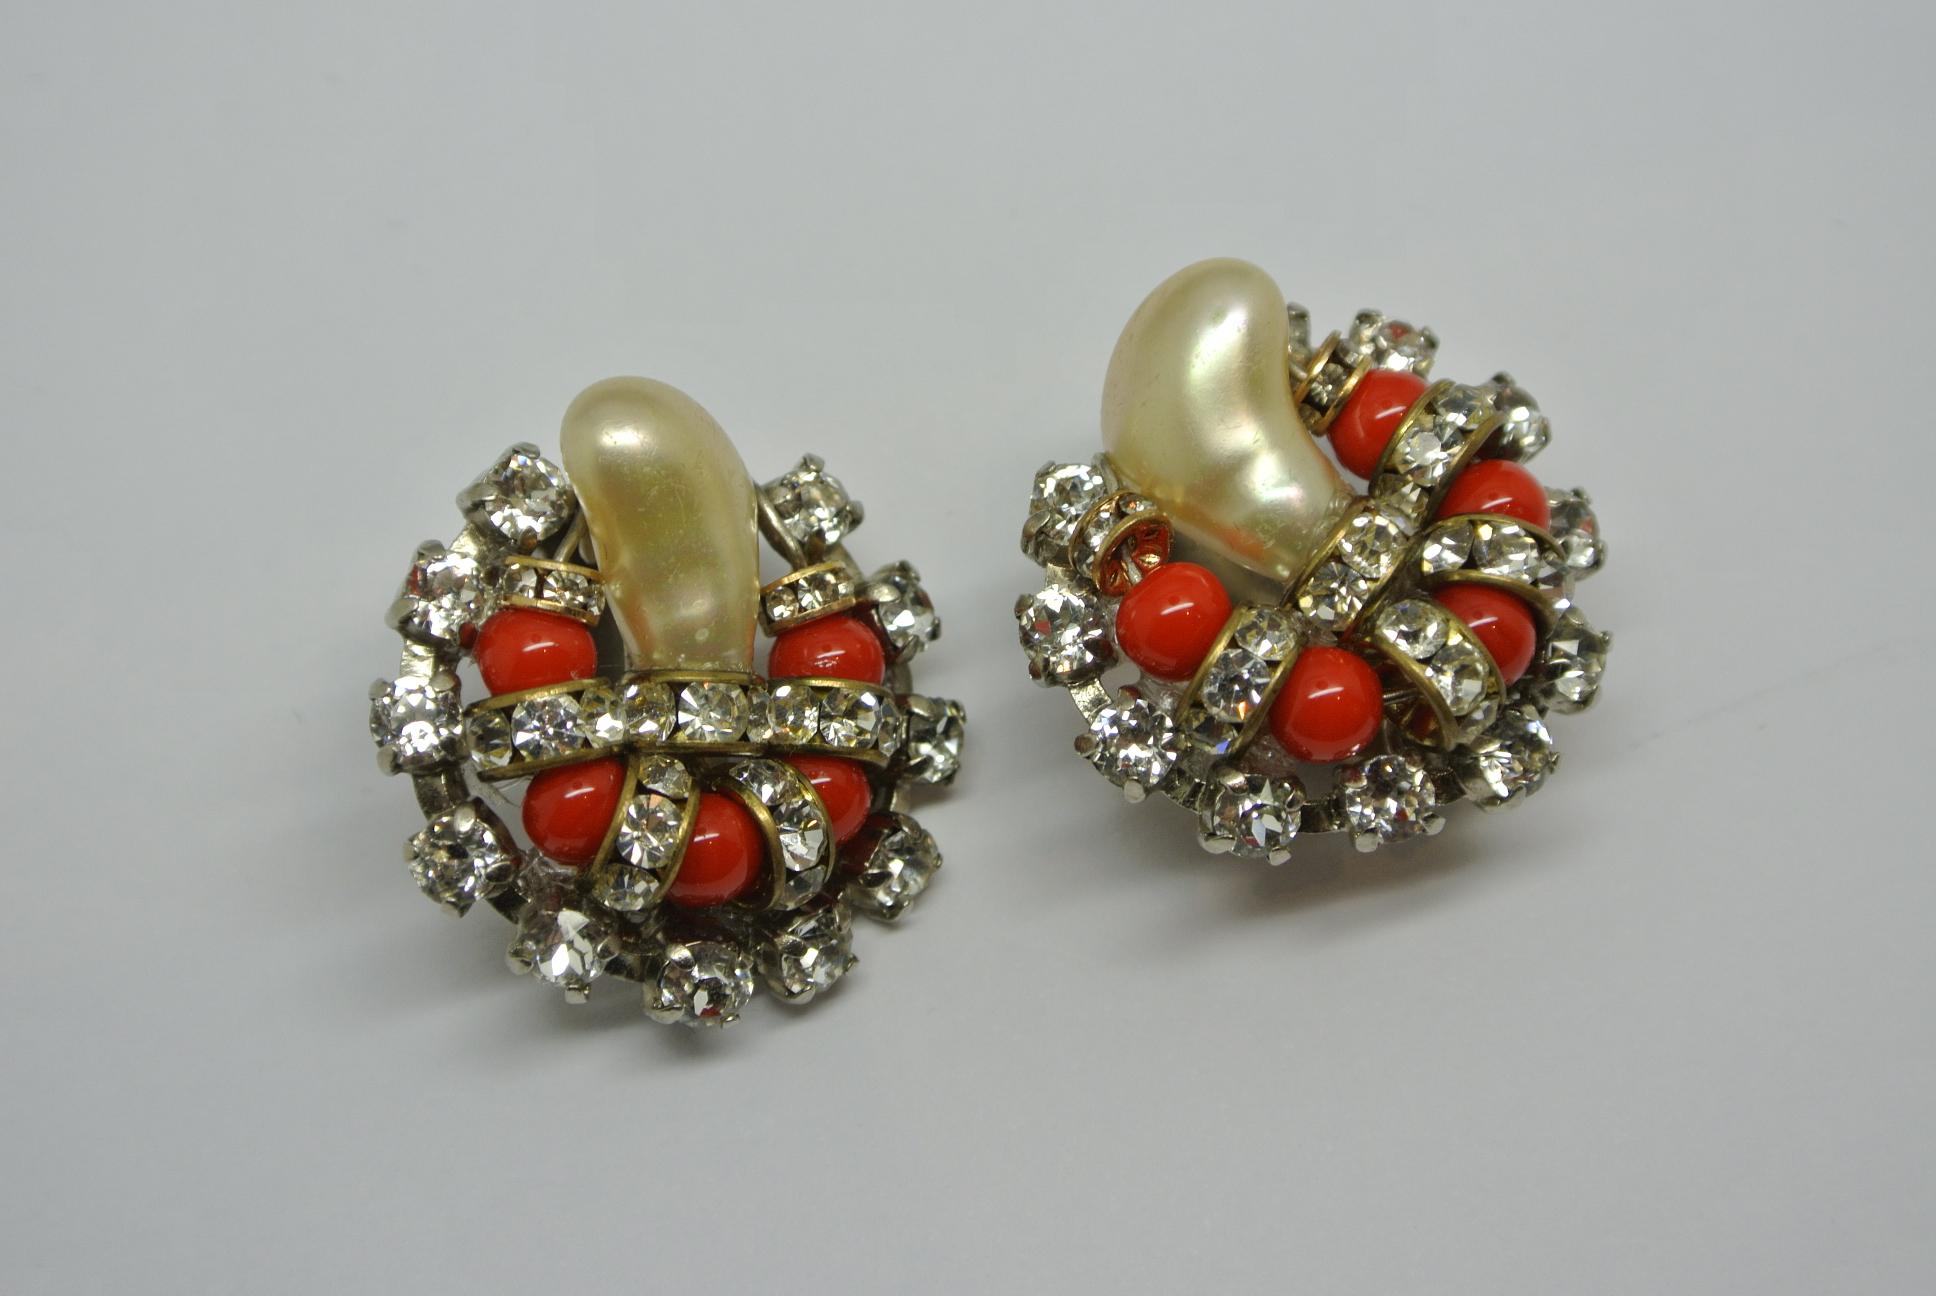 Vintage Chanel by Goossens Orange Glass Faux Pearl Earrings In Fair Condition For Sale In London, GB